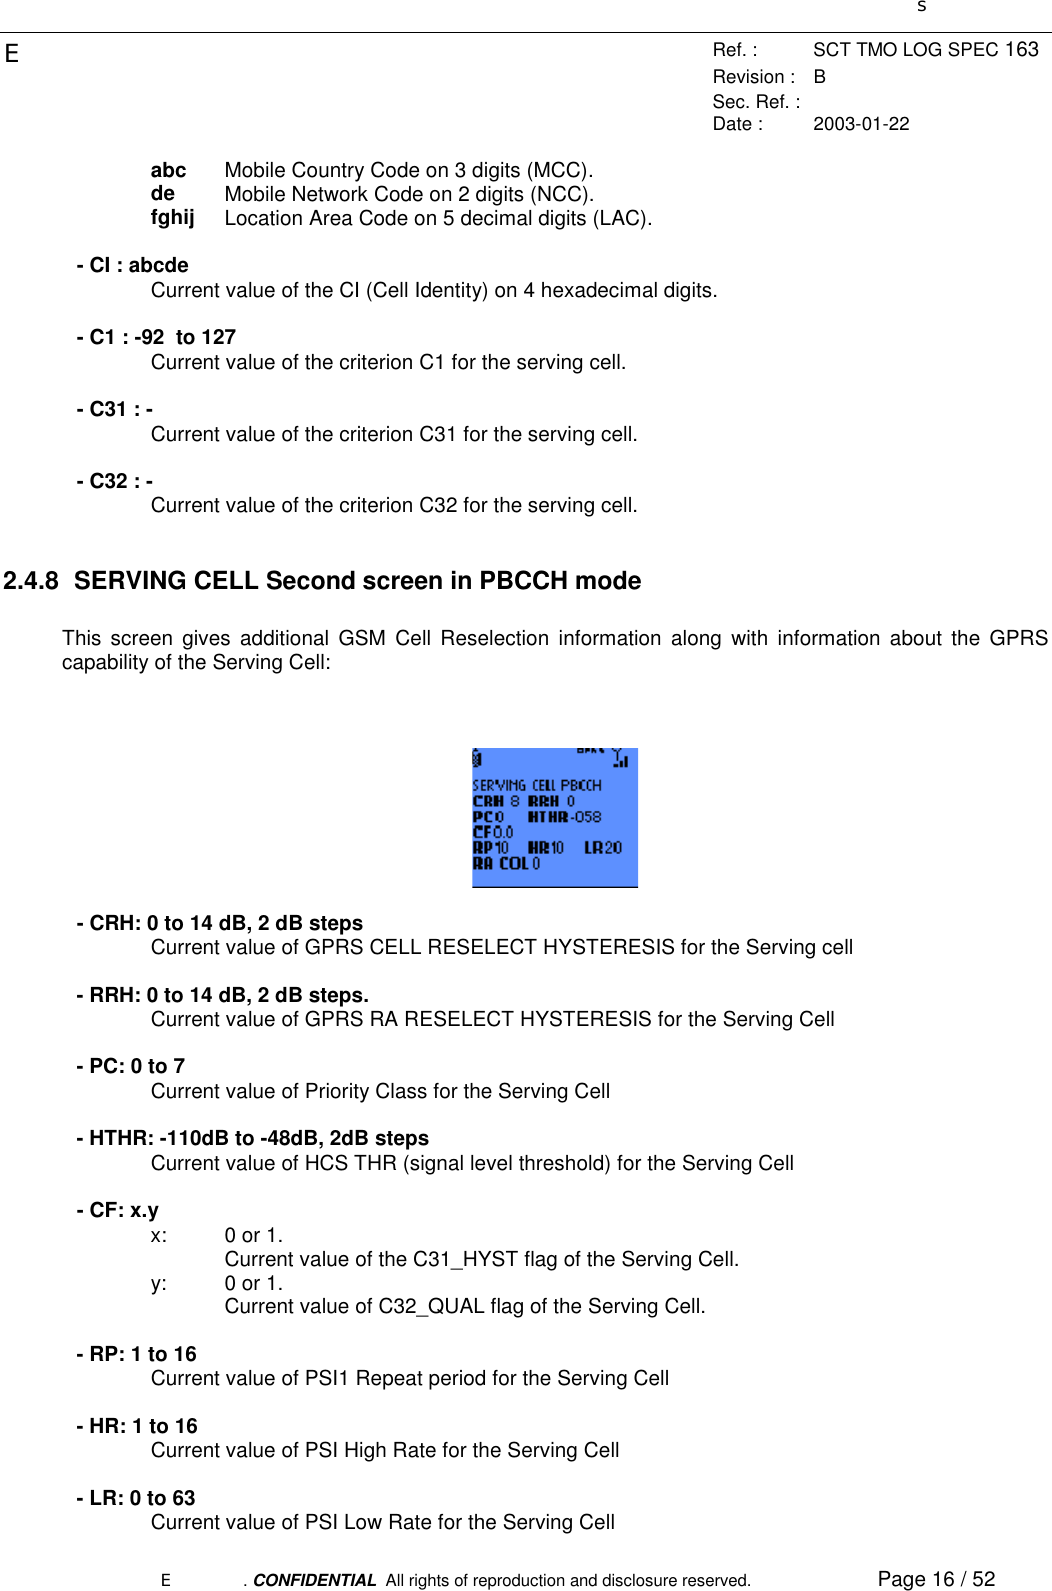 sERef. : SCT TMO LOG SPEC 163Revision : BSec. Ref. :Date : 2003-01-22E. CONFIDENTIAL  All rights of reproduction and disclosure reserved. Page 16 / 52abc Mobile Country Code on 3 digits (MCC).de Mobile Network Code on 2 digits (NCC).fghij Location Area Code on 5 decimal digits (LAC).- CI : abcdeCurrent value of the CI (Cell Identity) on 4 hexadecimal digits.- C1 : -92  to 127Current value of the criterion C1 for the serving cell.- C31 : -Current value of the criterion C31 for the serving cell.- C32 : -Current value of the criterion C32 for the serving cell.2.4.8  SERVING CELL Second screen in PBCCH modeThis screen gives additional GSM Cell Reselection information along with information about the GPRScapability of the Serving Cell:- CRH: 0 to 14 dB, 2 dB stepsCurrent value of GPRS CELL RESELECT HYSTERESIS for the Serving cell- RRH: 0 to 14 dB, 2 dB steps.Current value of GPRS RA RESELECT HYSTERESIS for the Serving Cell- PC: 0 to 7Current value of Priority Class for the Serving Cell- HTHR: -110dB to -48dB, 2dB stepsCurrent value of HCS THR (signal level threshold) for the Serving Cell- CF: x.yx:  0 or 1.Current value of the C31_HYST flag of the Serving Cell.y:  0 or 1.Current value of C32_QUAL flag of the Serving Cell.- RP: 1 to 16Current value of PSI1 Repeat period for the Serving Cell- HR: 1 to 16Current value of PSI High Rate for the Serving Cell- LR: 0 to 63Current value of PSI Low Rate for the Serving Cell